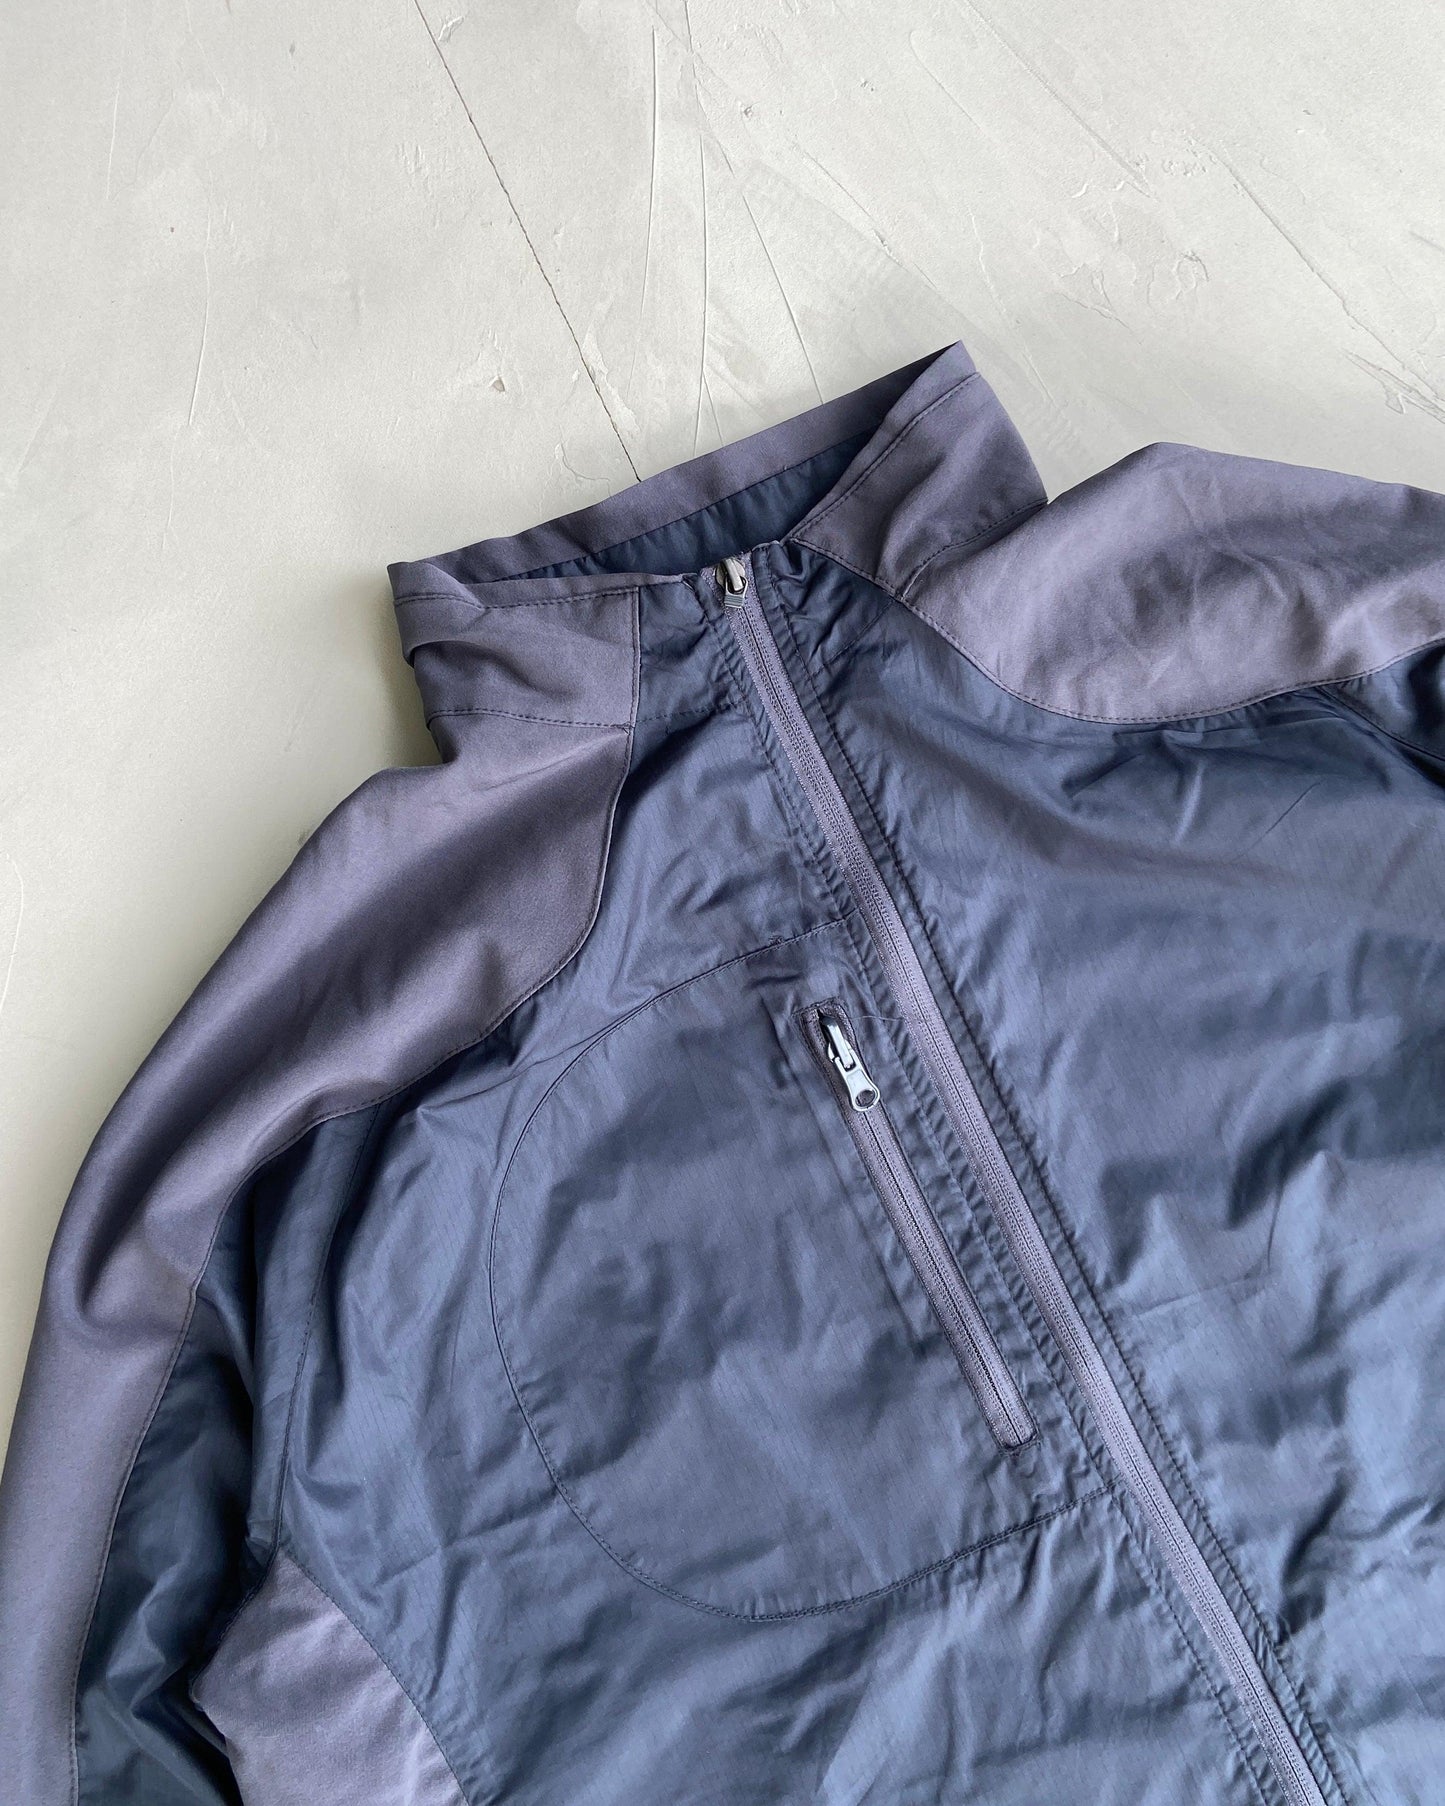 NORTH END NYLON SPORT JACKET - L - Known Source